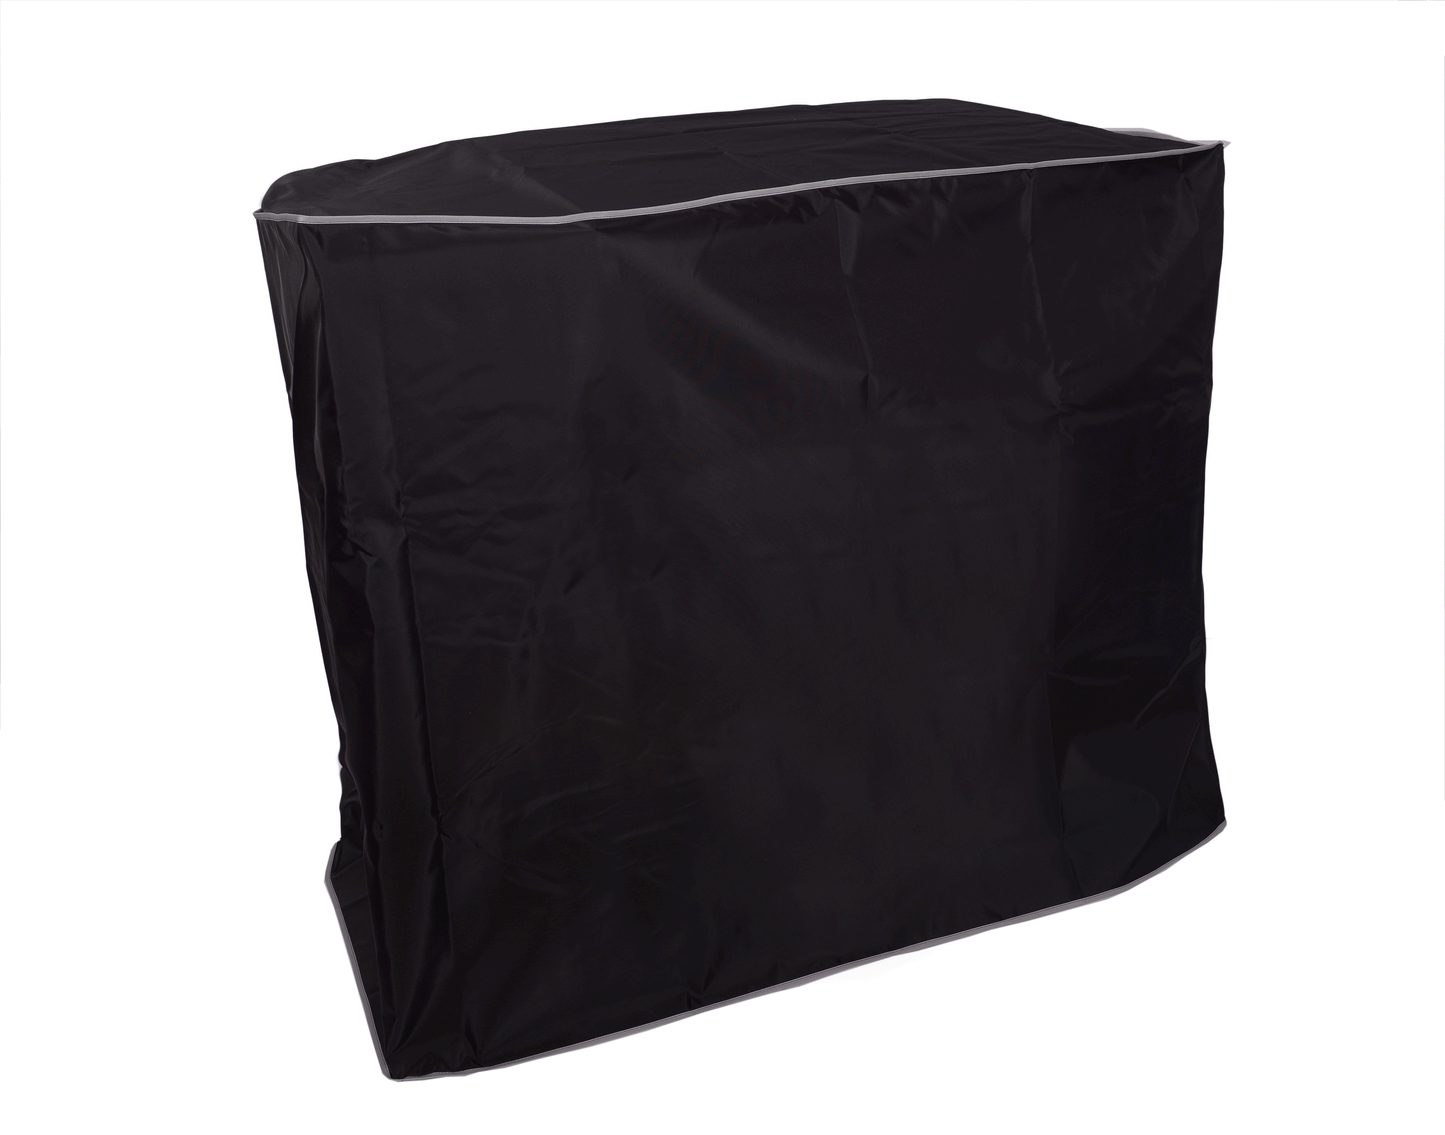 The Perfect Dust Cover, Black Nylon Cover Compatible with Canon imagePROGRAF PRO-6600S 60" Large-Format Printer, Anti Static, Double Stitched and Waterproof Dust Cover Dimensions 78.7''W x 38.7''D x 46''H by The Perfect Dust Cover LLC